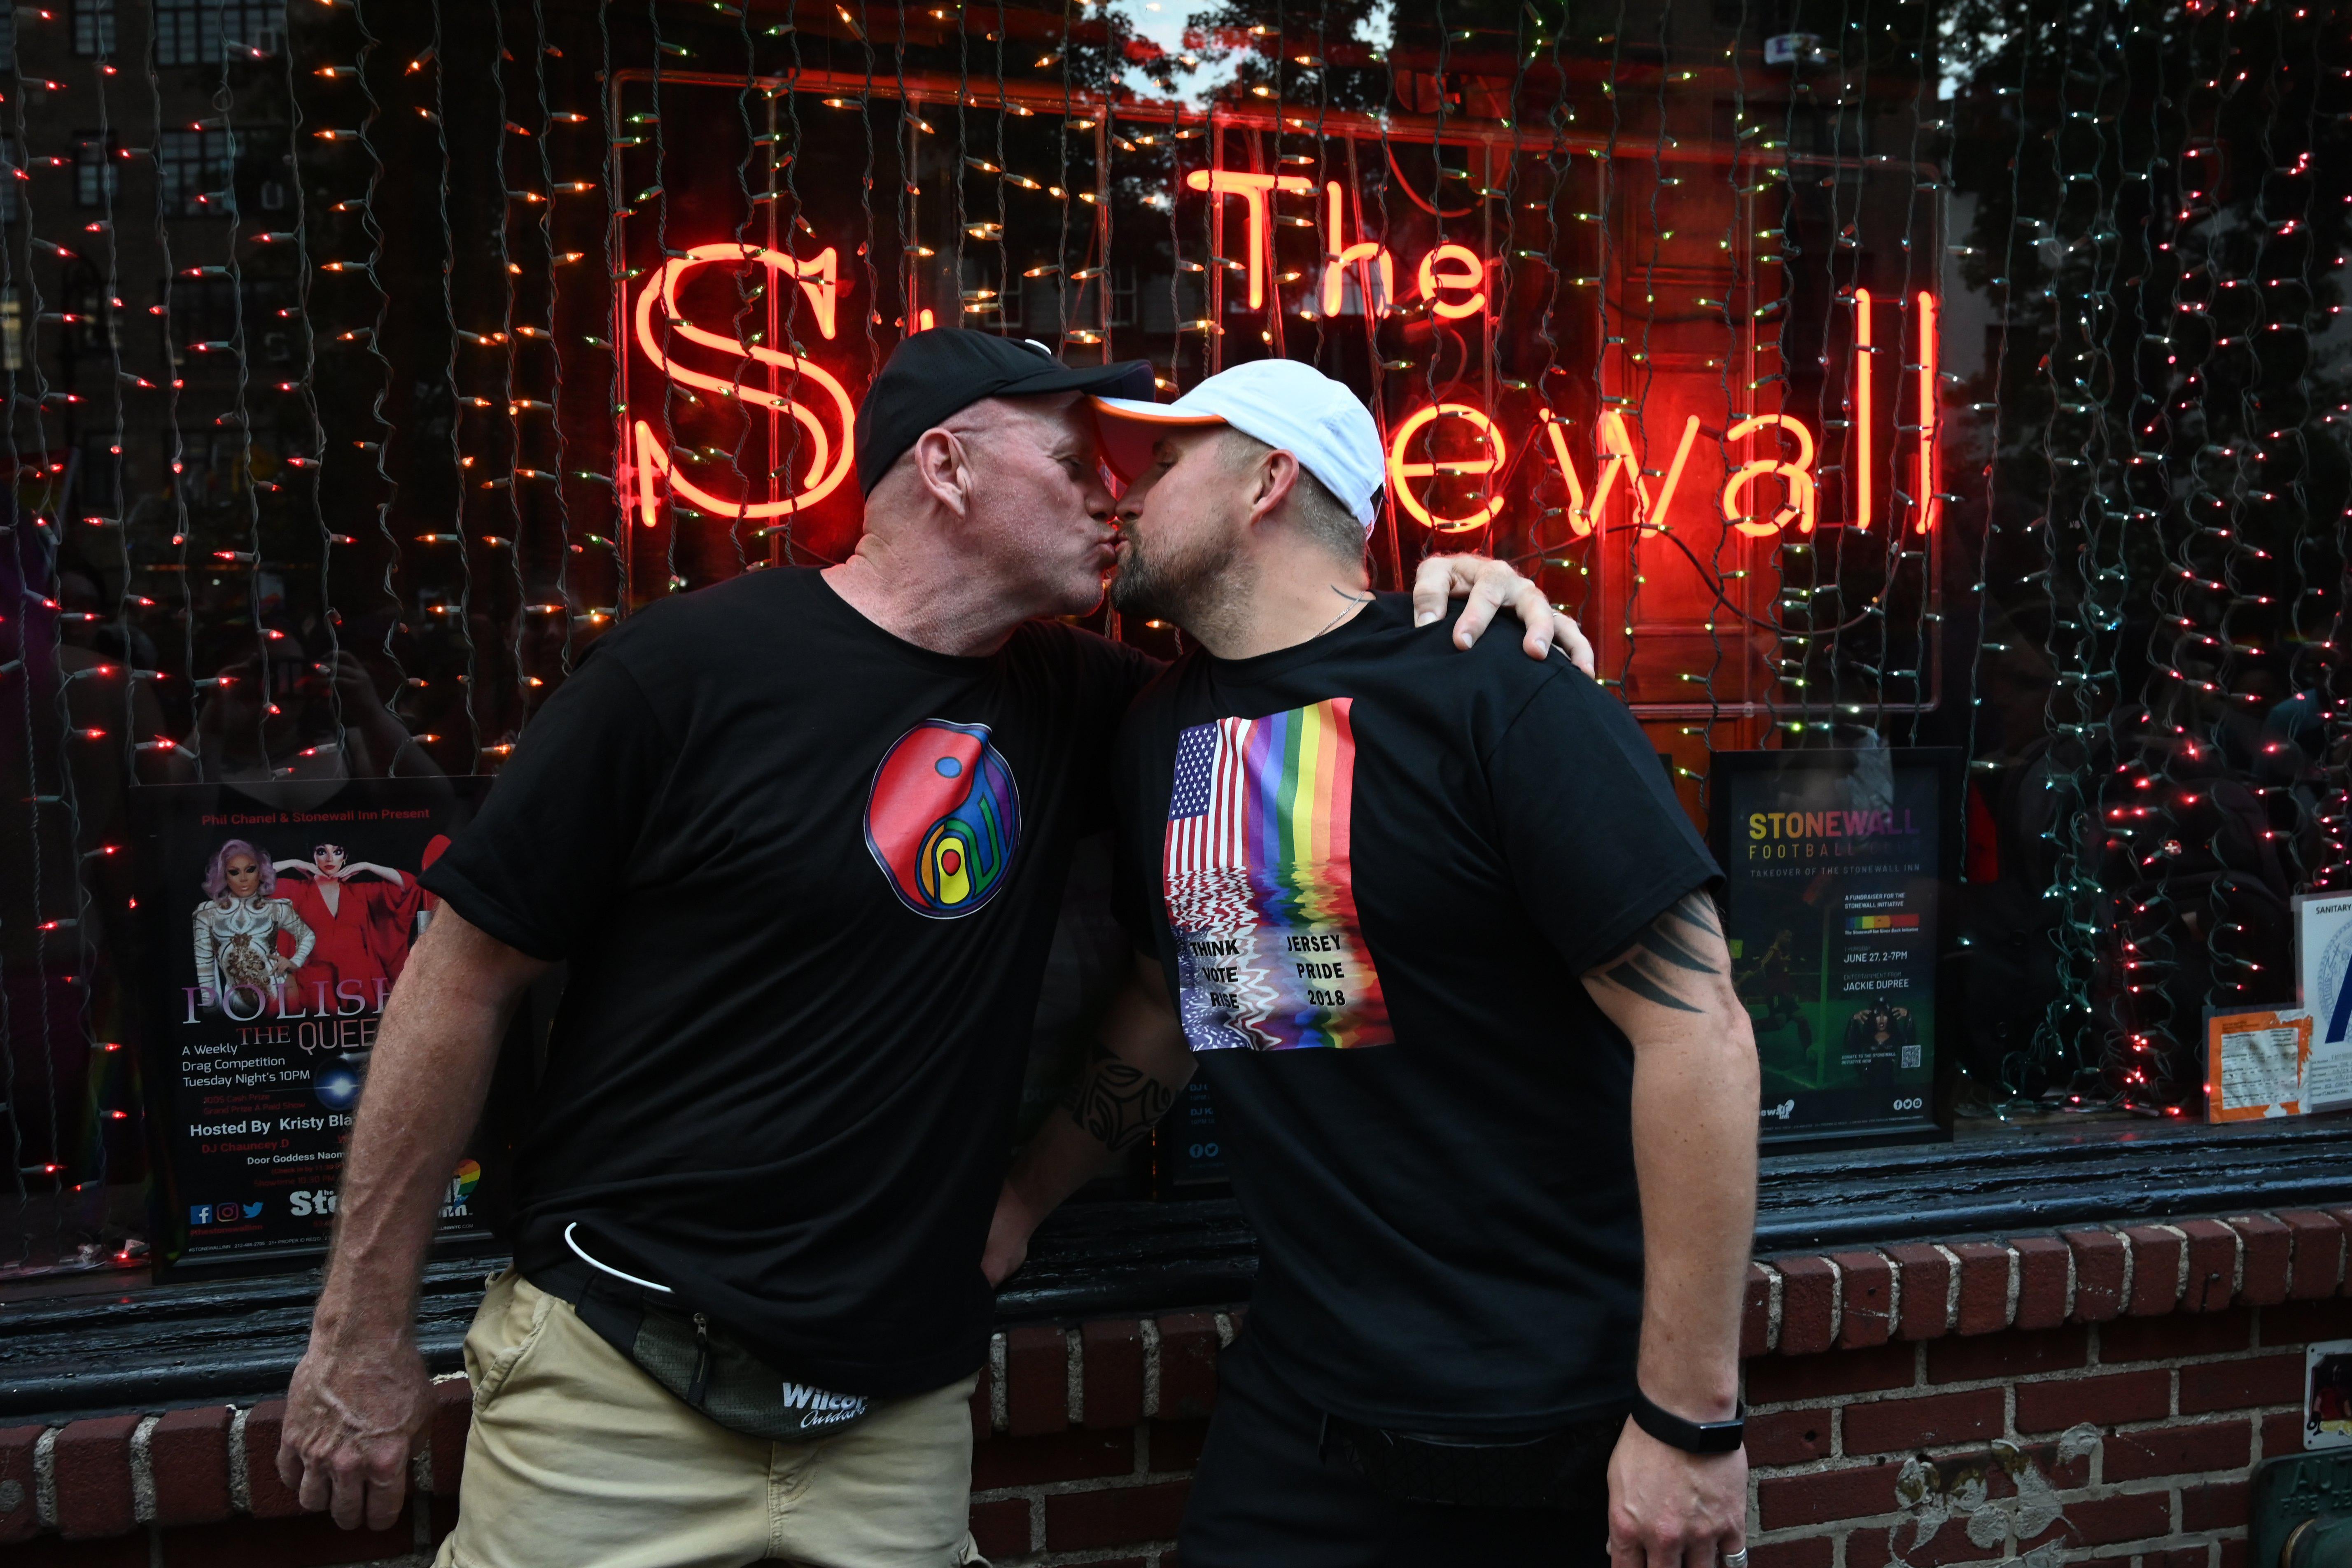 Two people kiss in front of the Stonewall Inn bar during Pride celebrations.